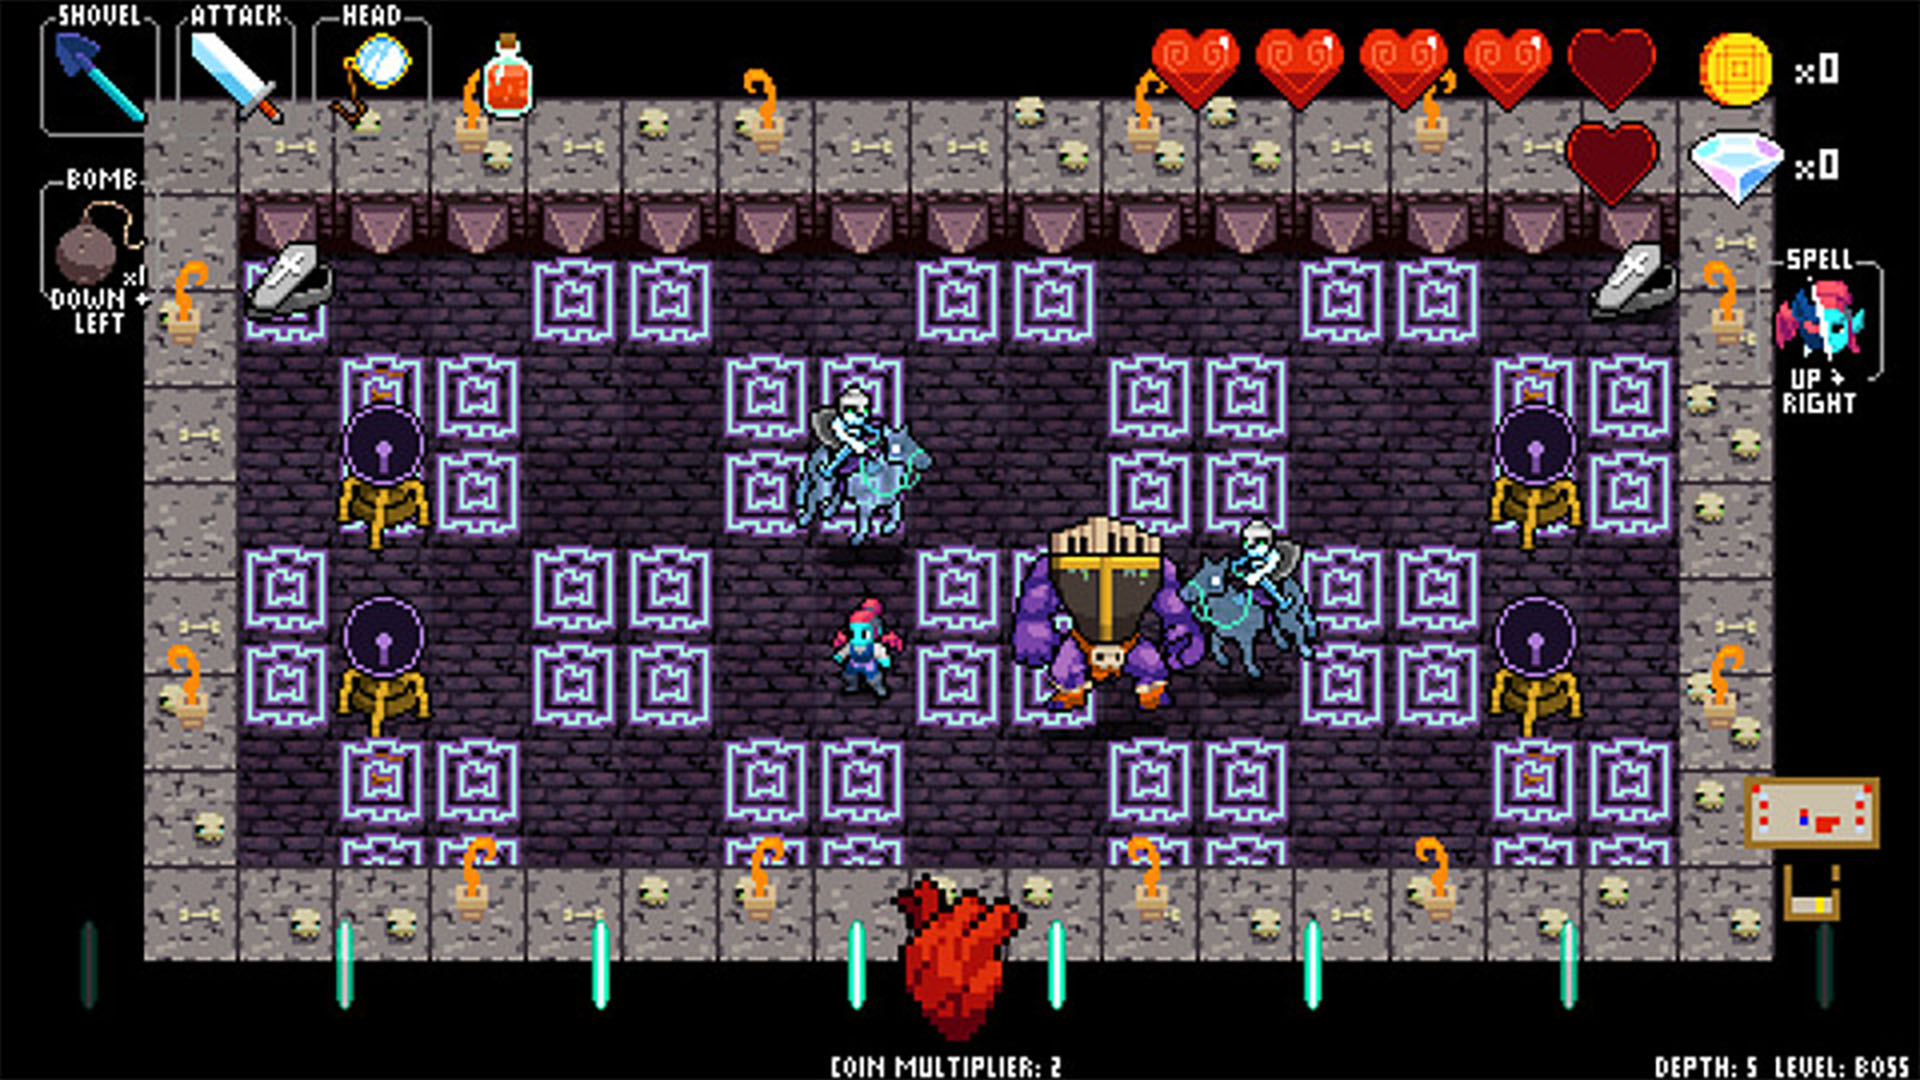 Crypt of the NecroDancer - Android game screenshots.